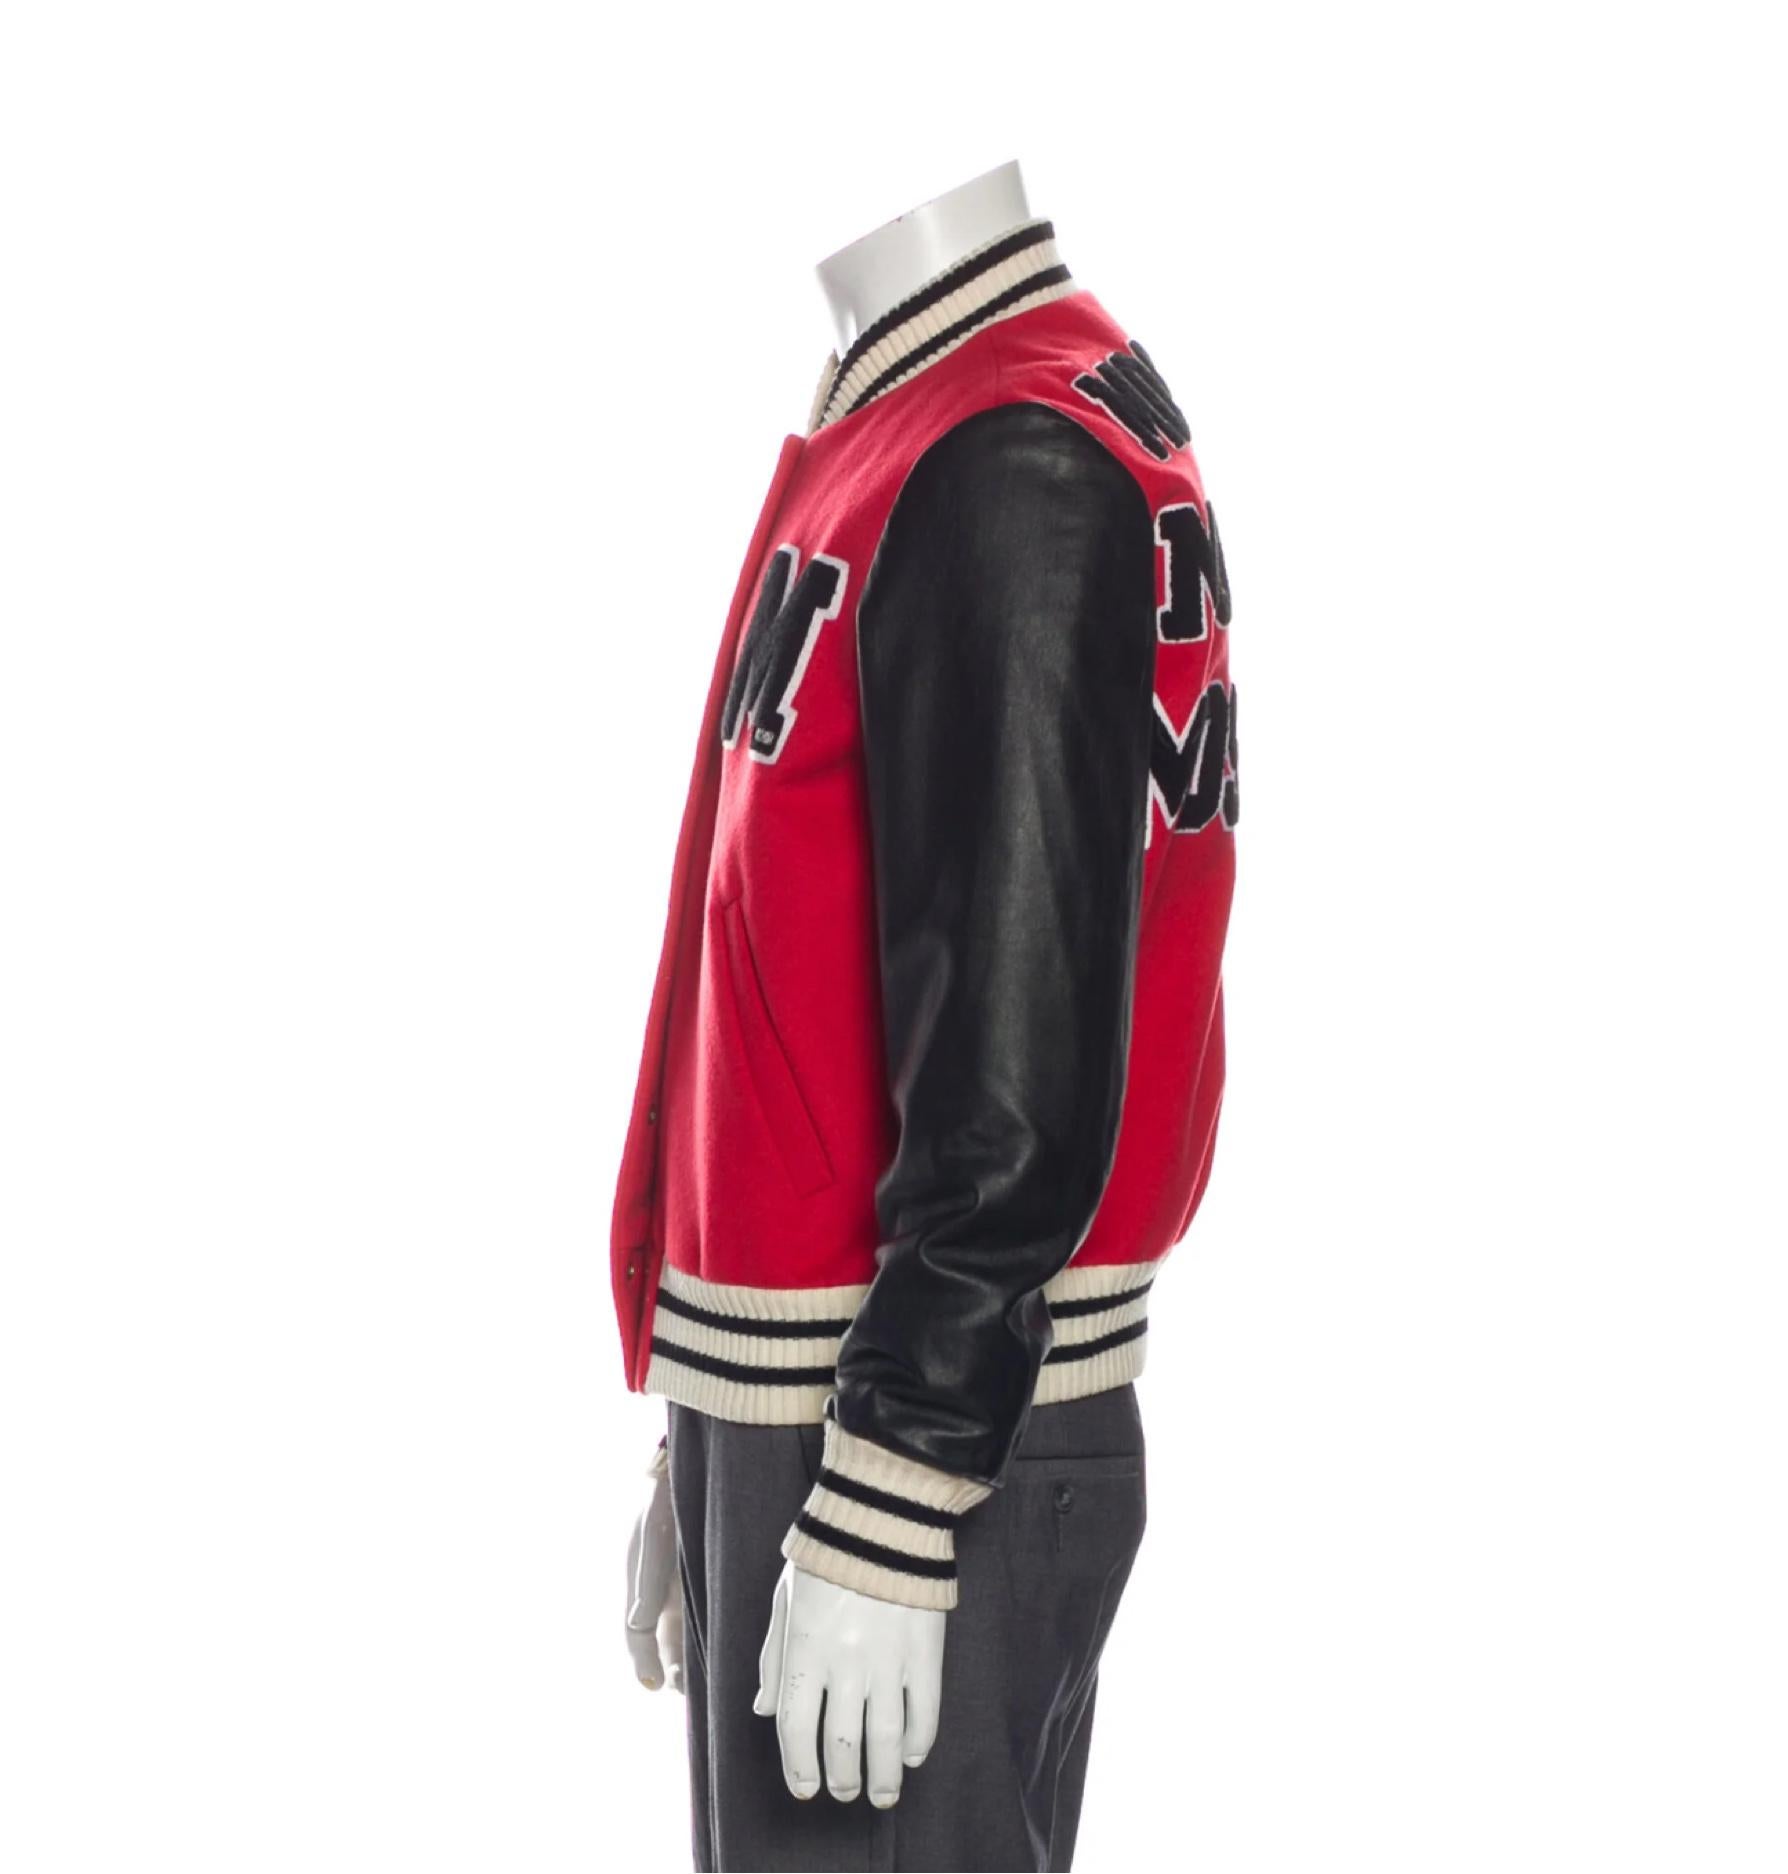 Featuring virgin wool fabric, black and red with a graphic print, woven lining, collar, set pockets and button closure. Pre-fall 2014 by Jeremy Scott

COLOR: Red and black
MATERIAL: 80% wool, 20% cashmere.
SIZE: Medium
CONDITION: Very good